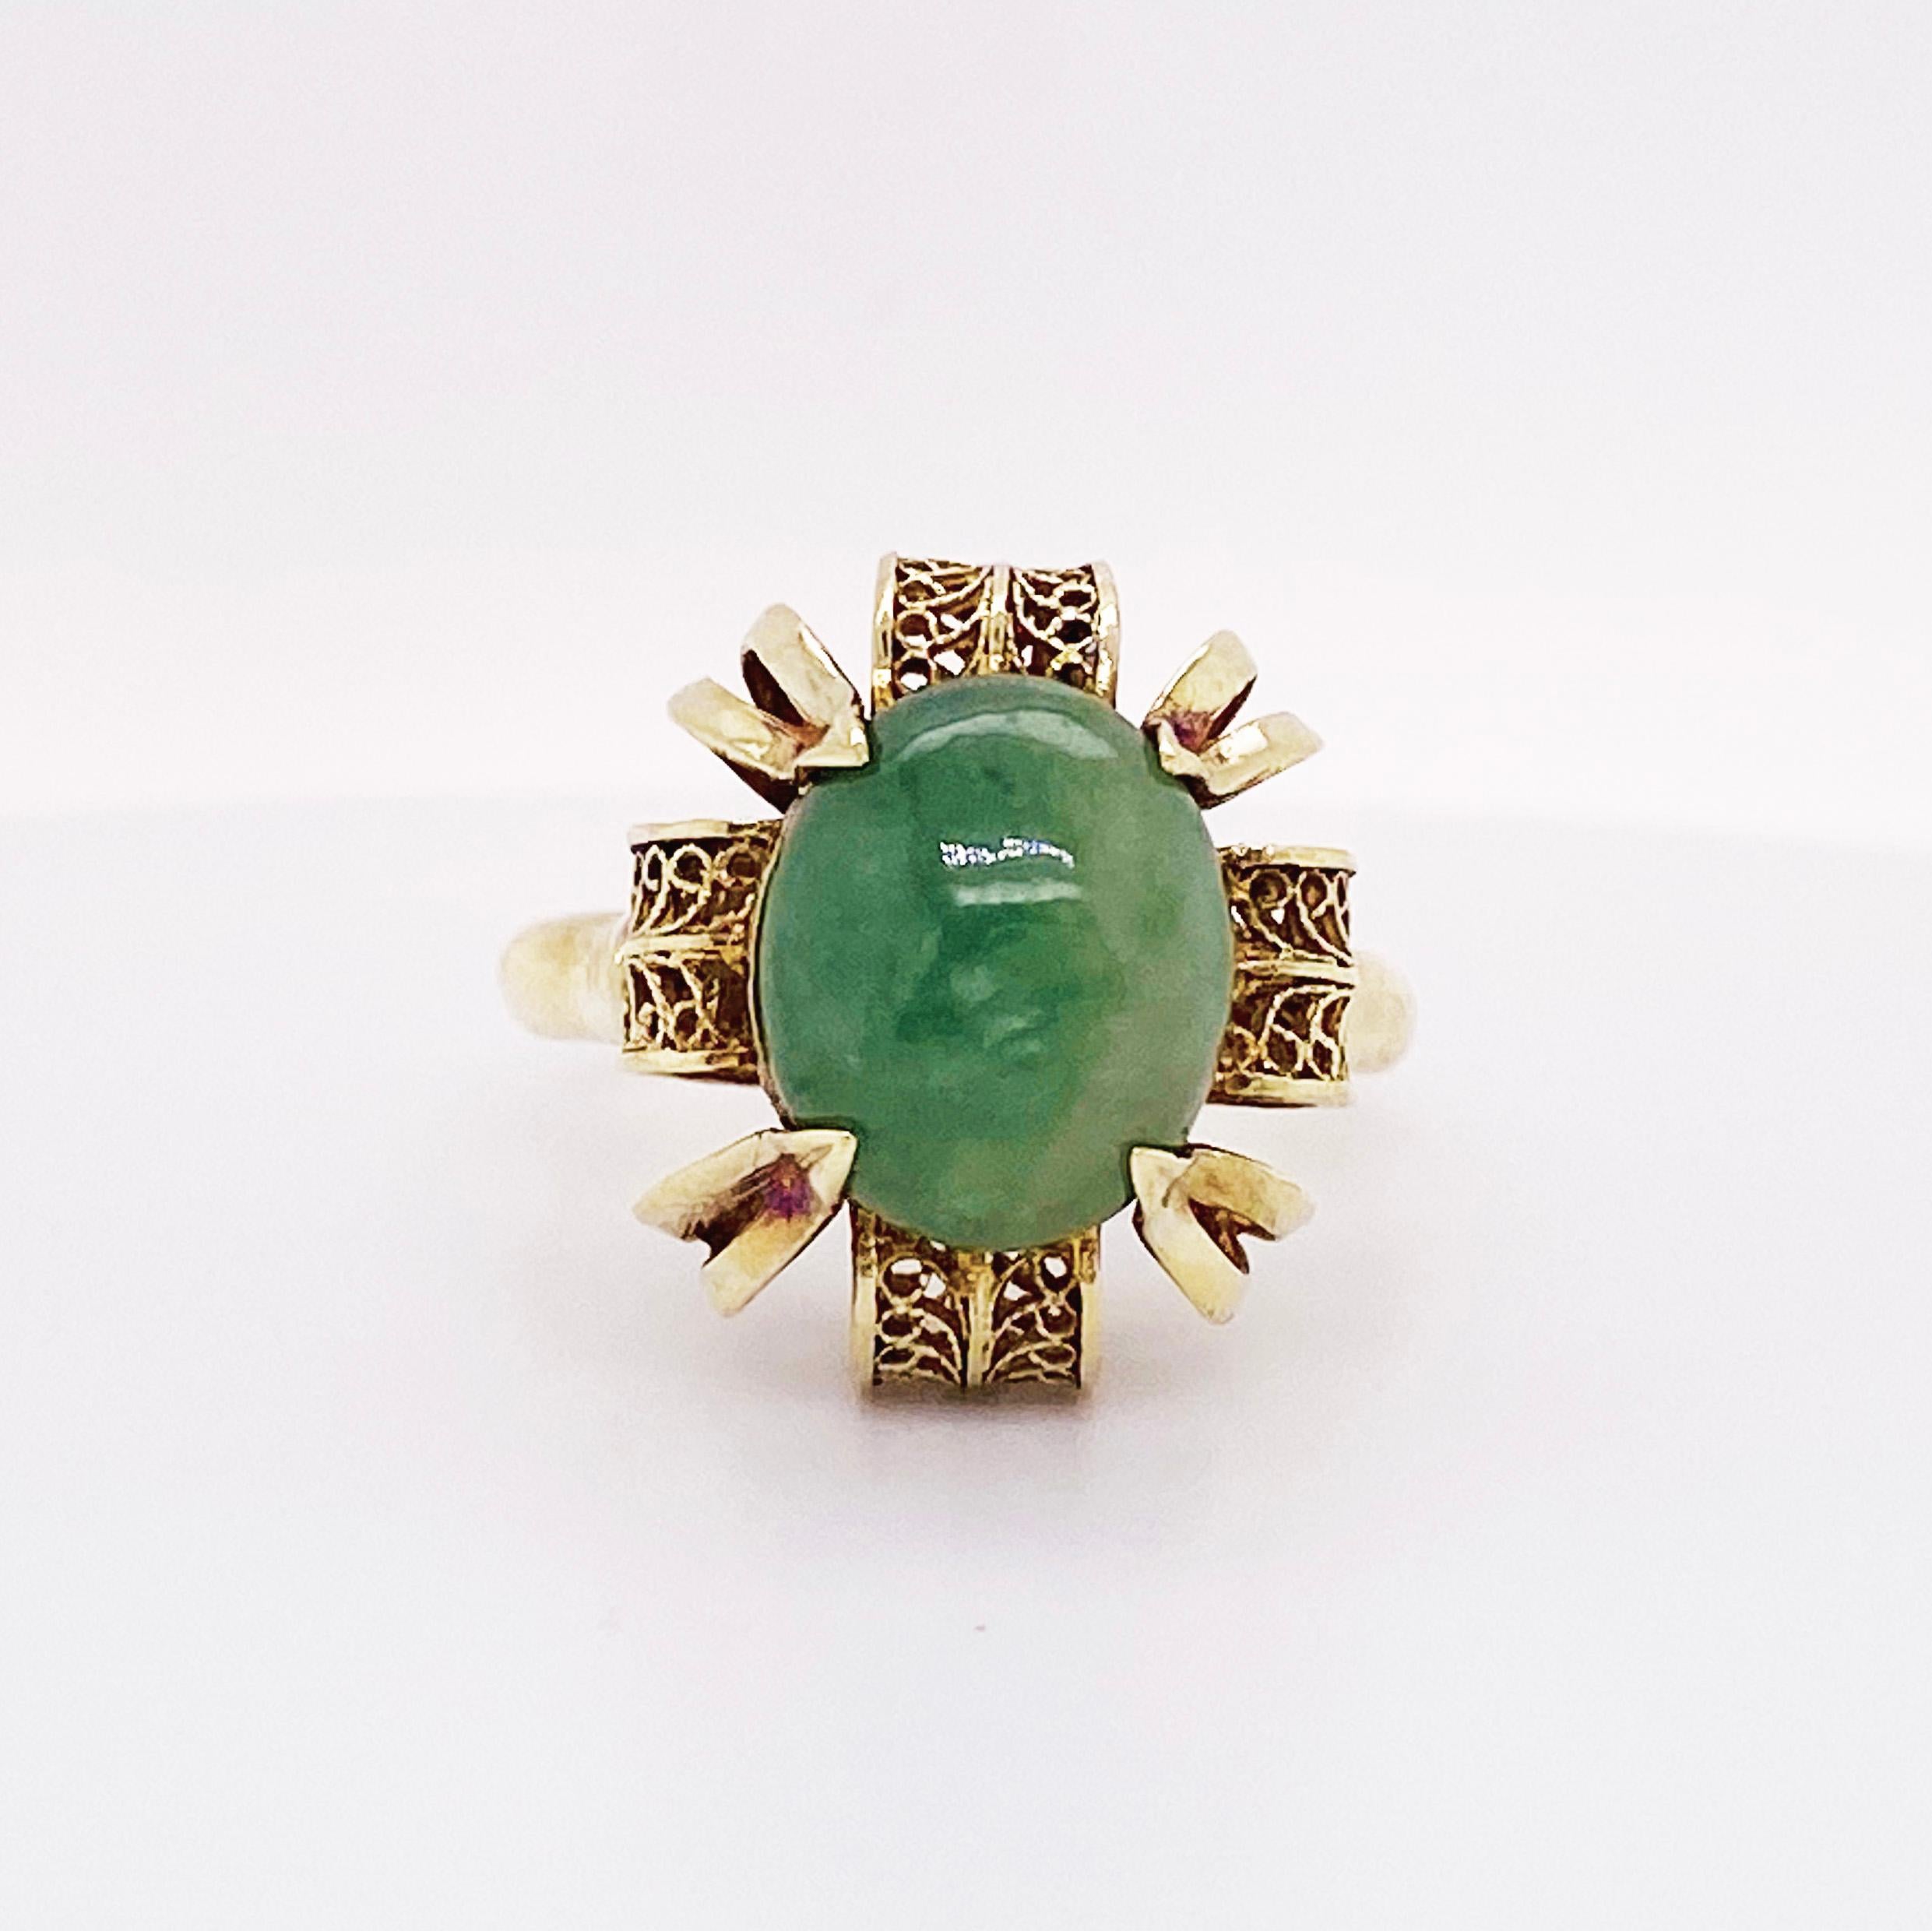 Is beautiful green jadeite jade something that you would enjoy wearing!  Jadeite has meaning and properties of bringing happiness! This gemstone is filled with positive energy. It would change your body condition to a body that can attract more